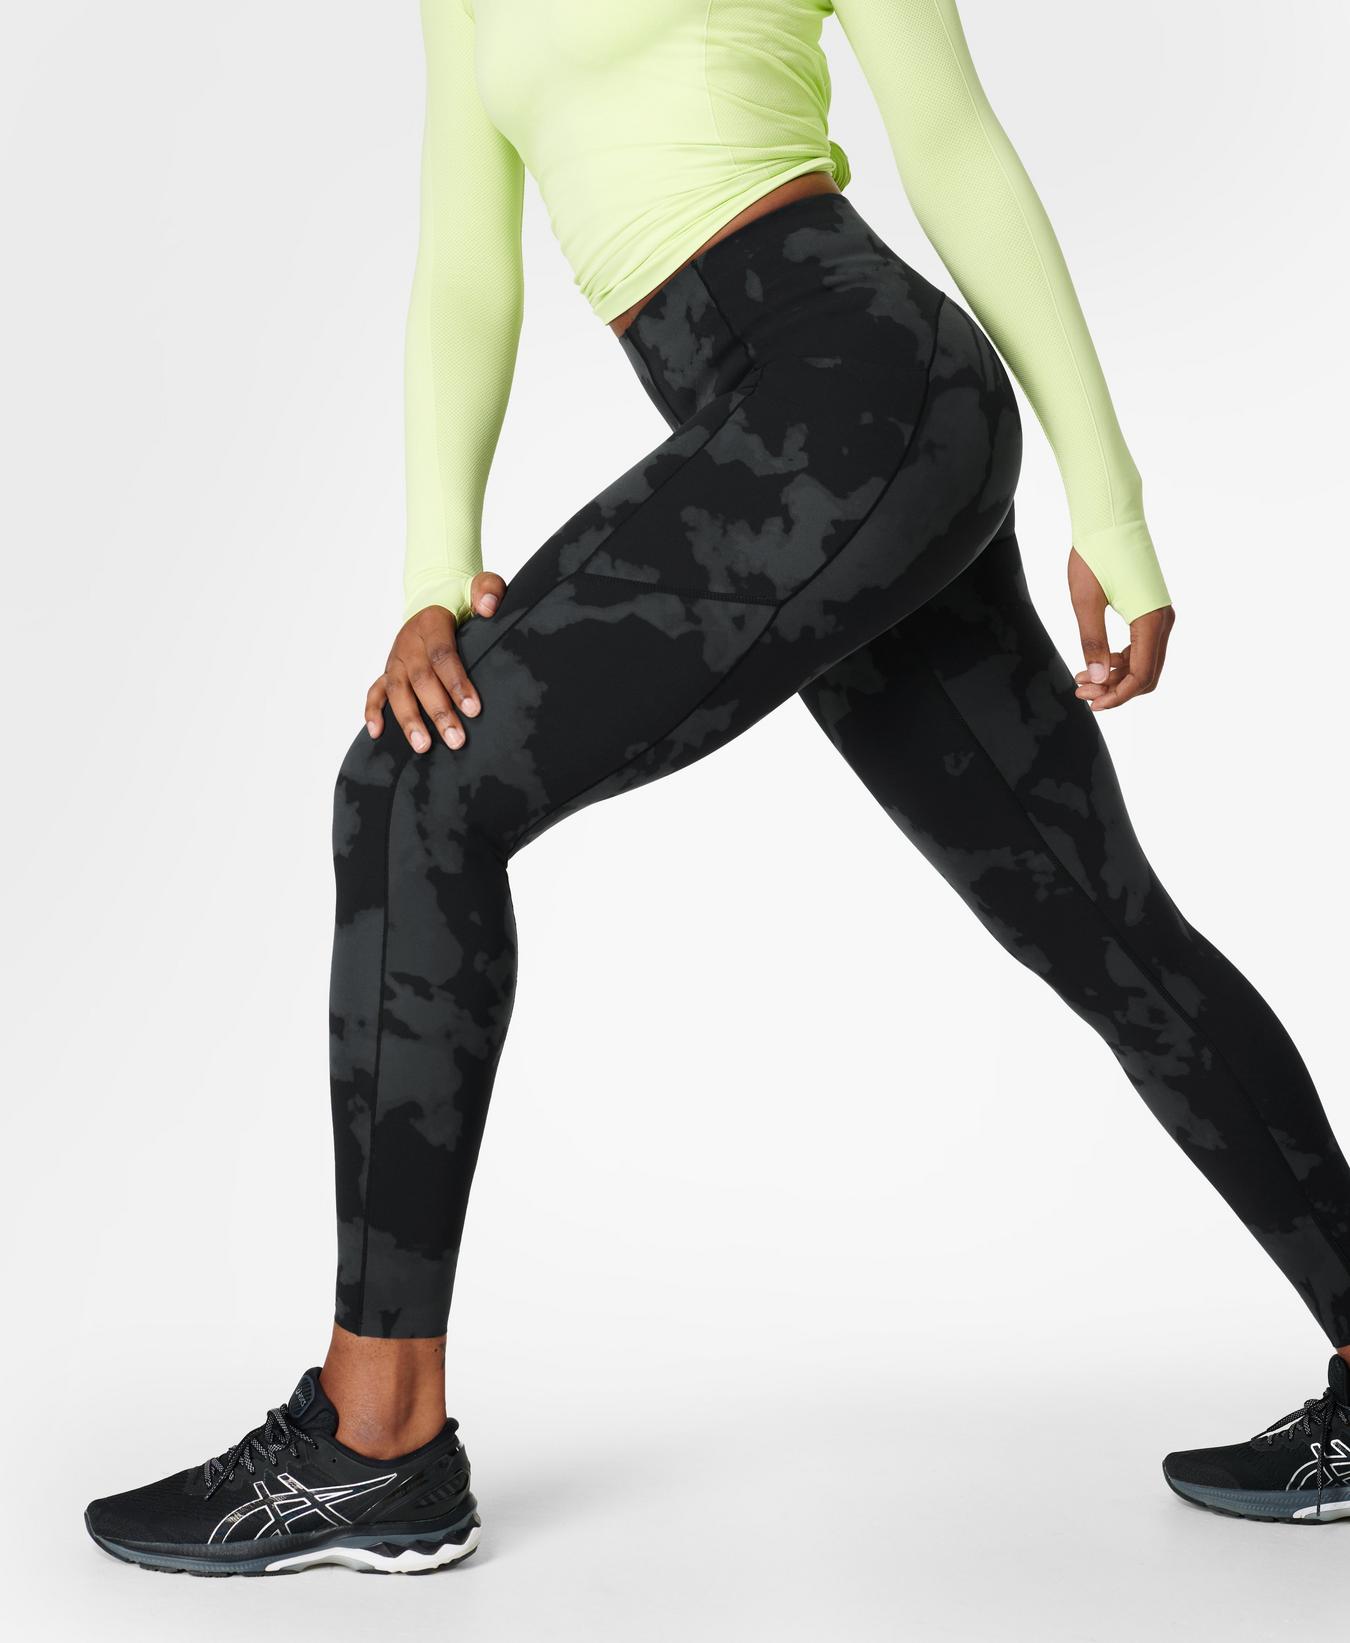 Aggregate more than 192 best affordable workout leggings latest